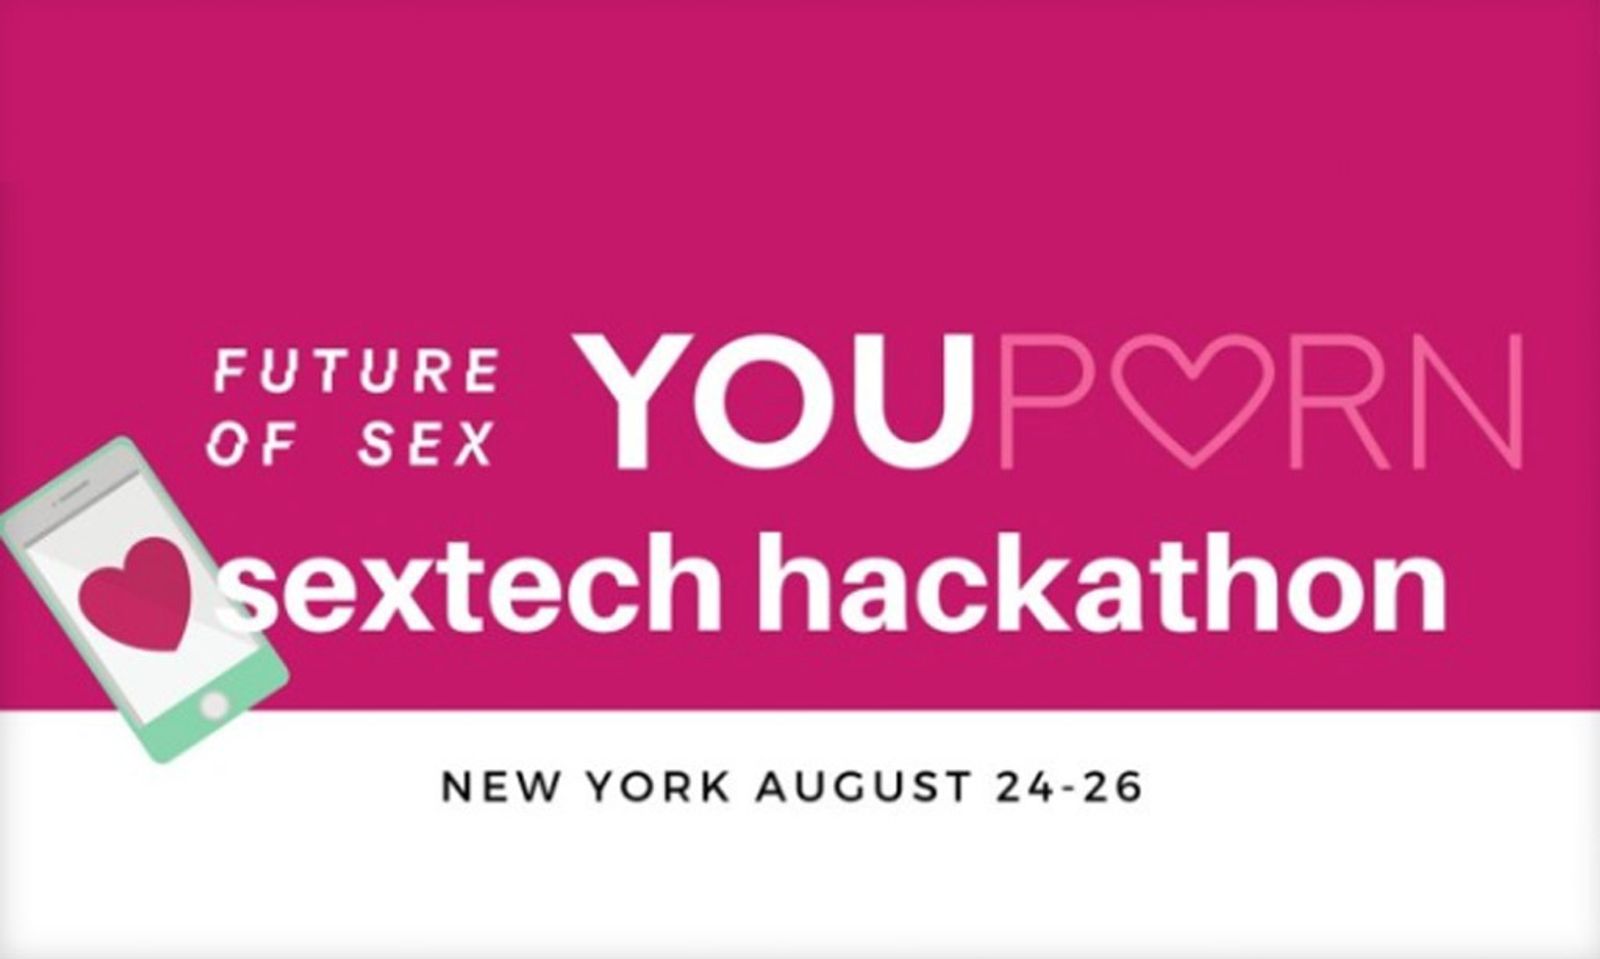 YouPorn Sponsoring Future of Sex's Sextech Hackathon in NYC